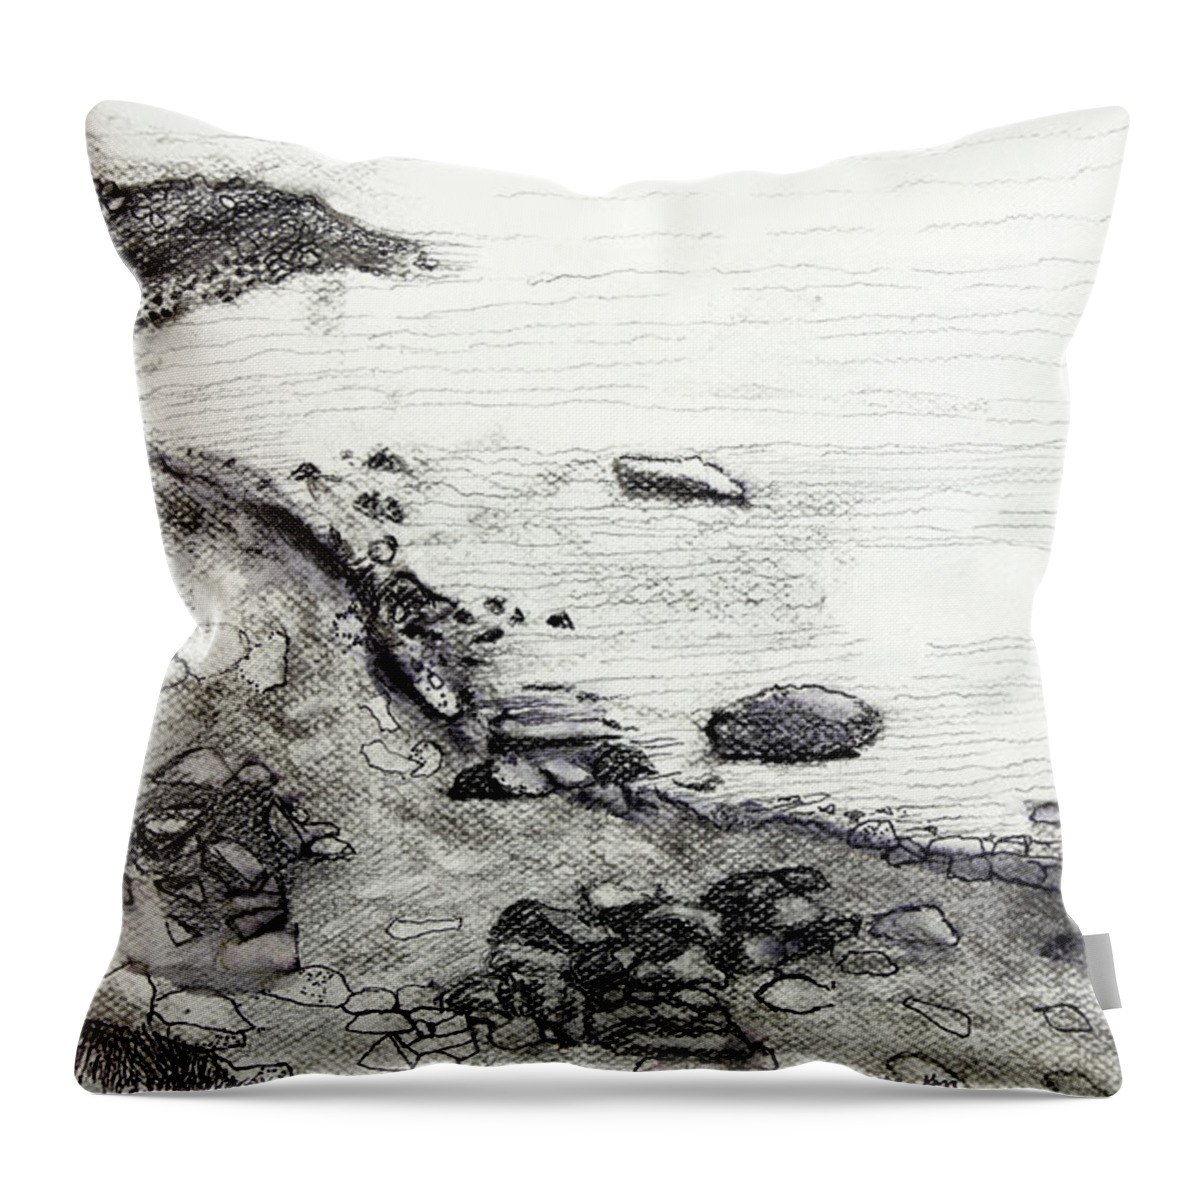  Throw Pillow featuring the painting Kinnacurra Shore by Kathleen Barnes